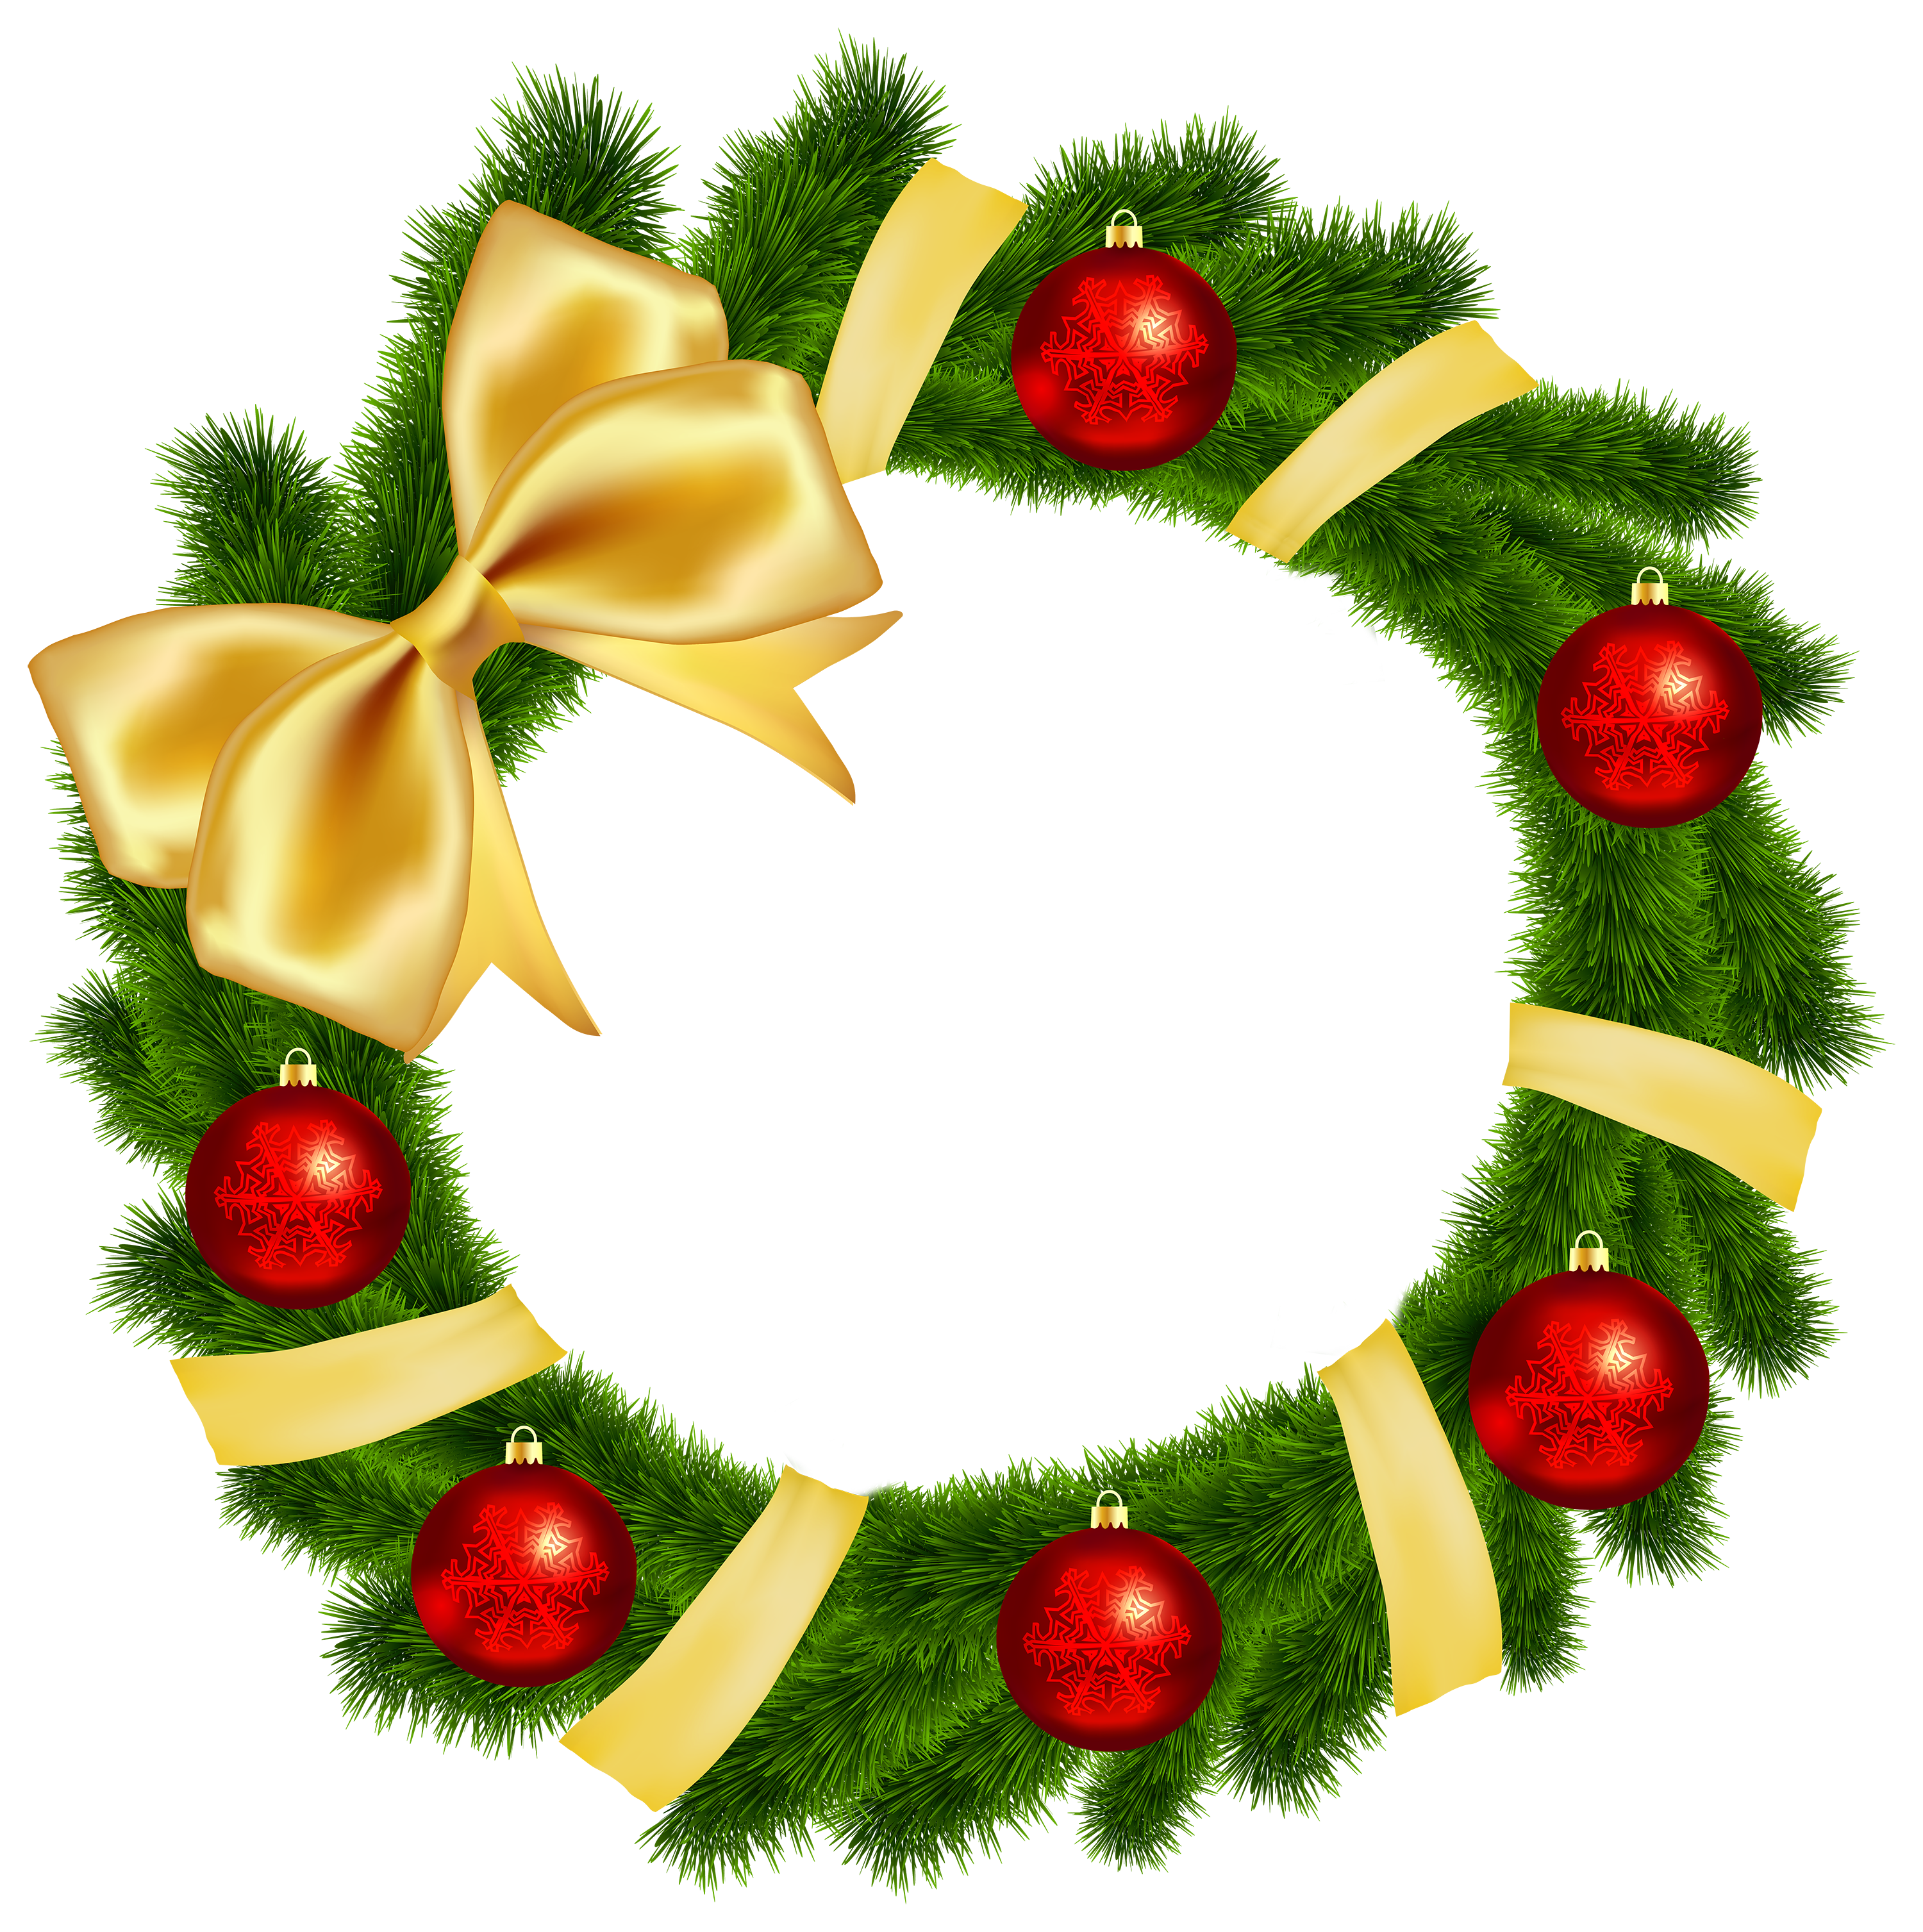 Christmas garland border transparent png. Wreath with yellow bow